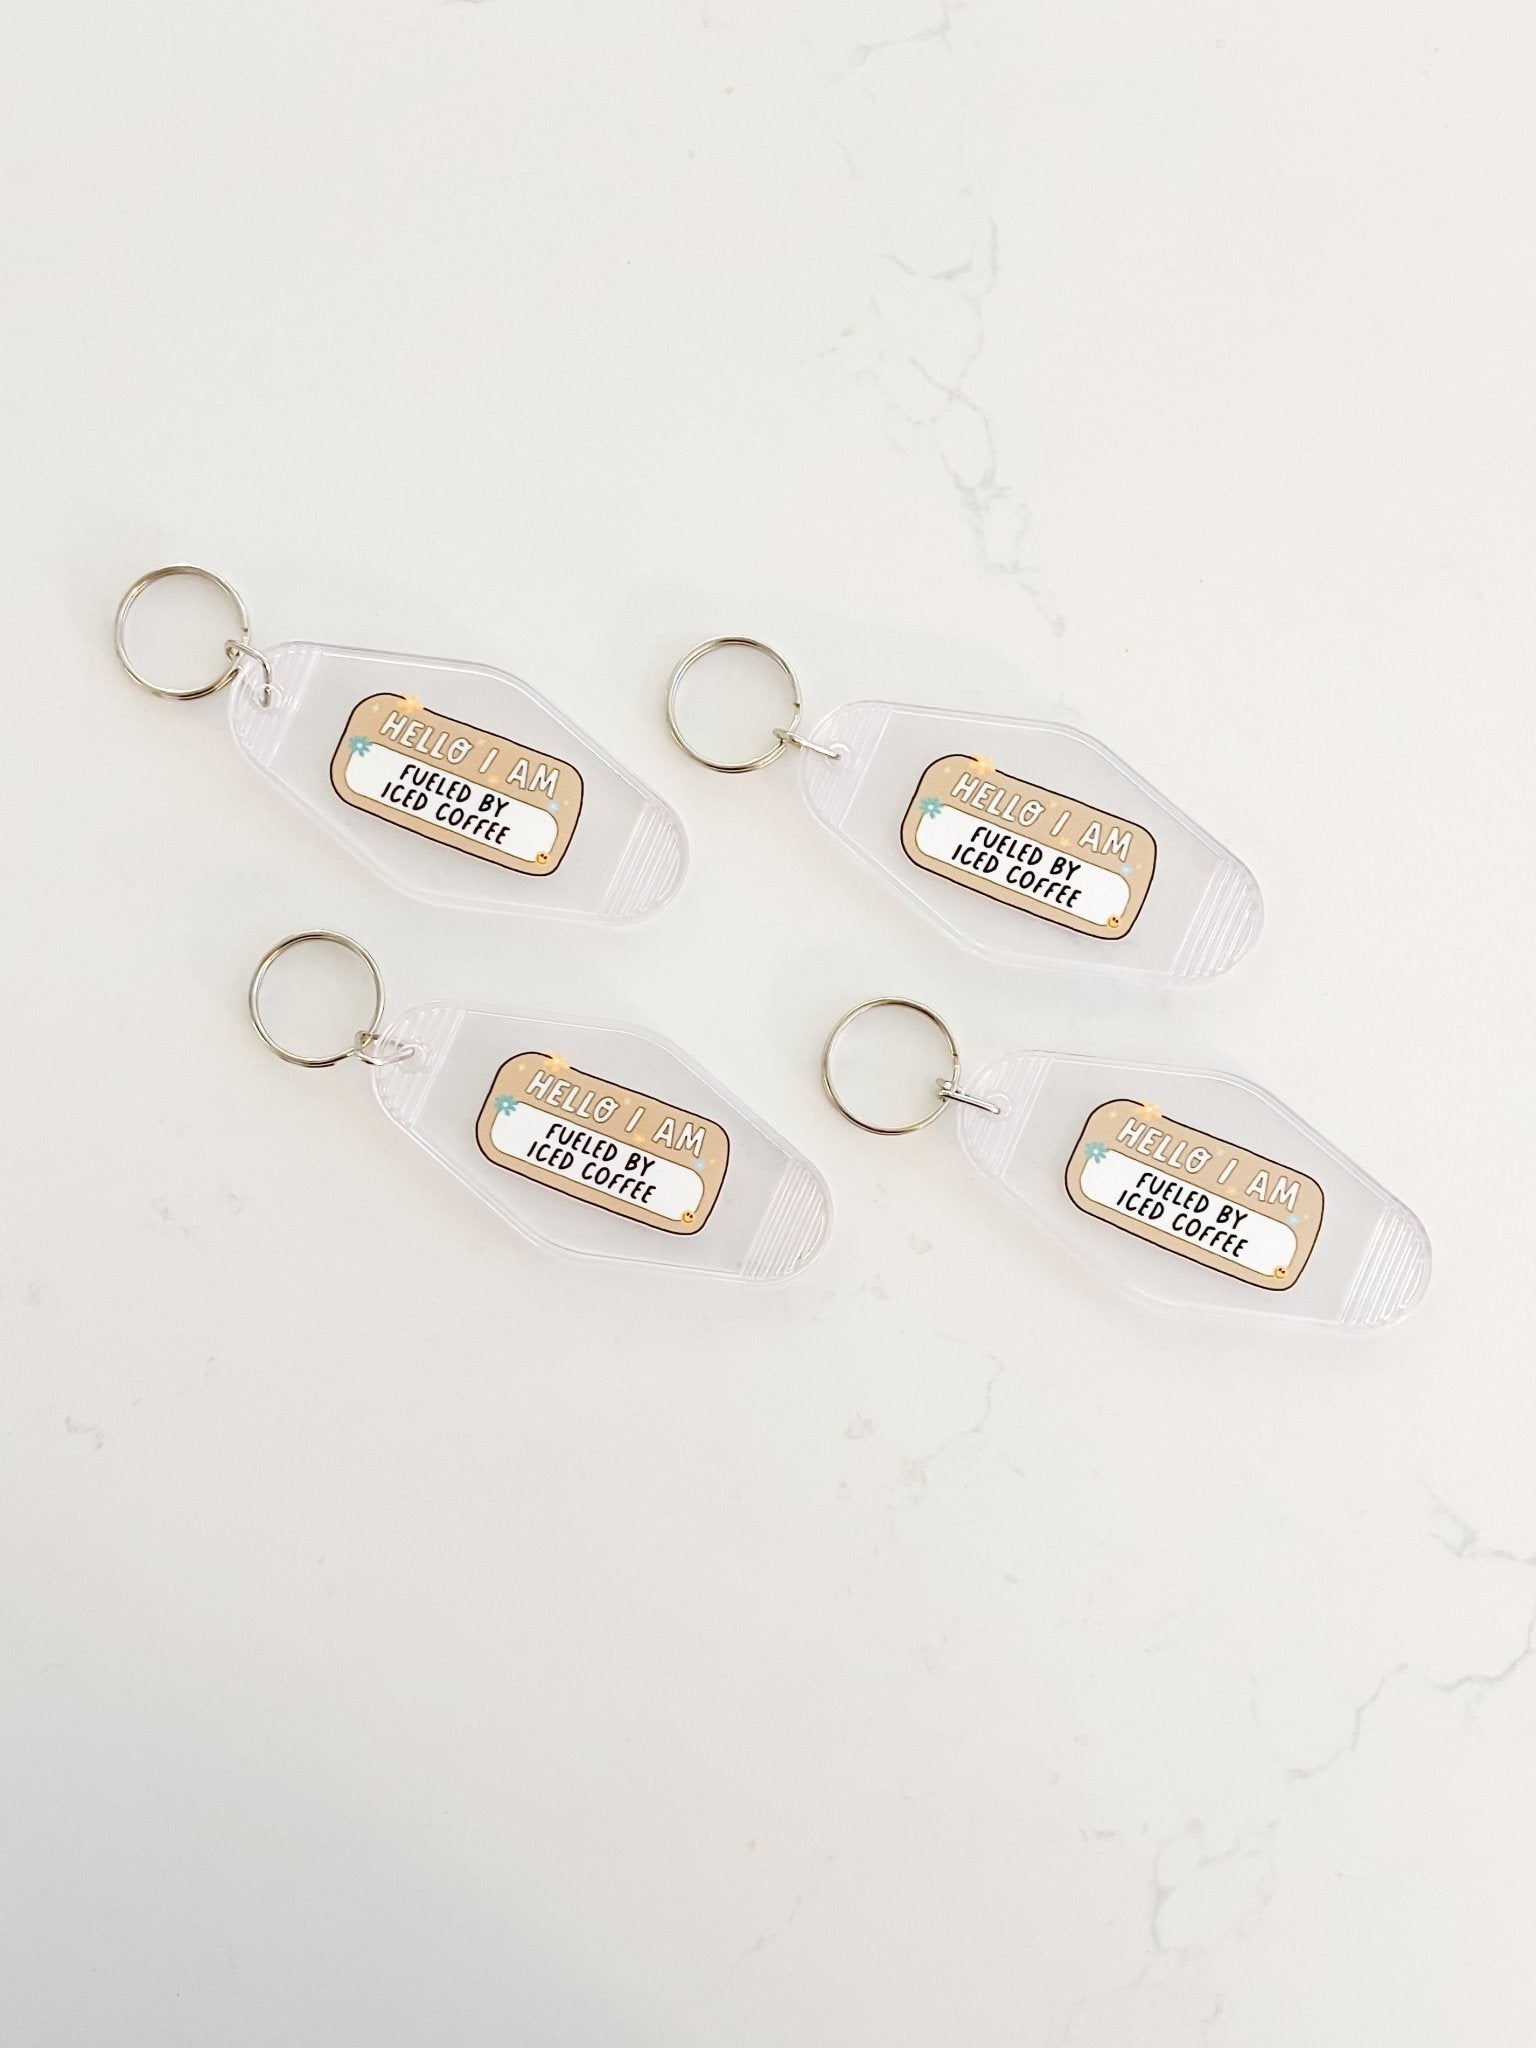 Fueled by Iced Coffee Keychain - Designs by Lauren Ann